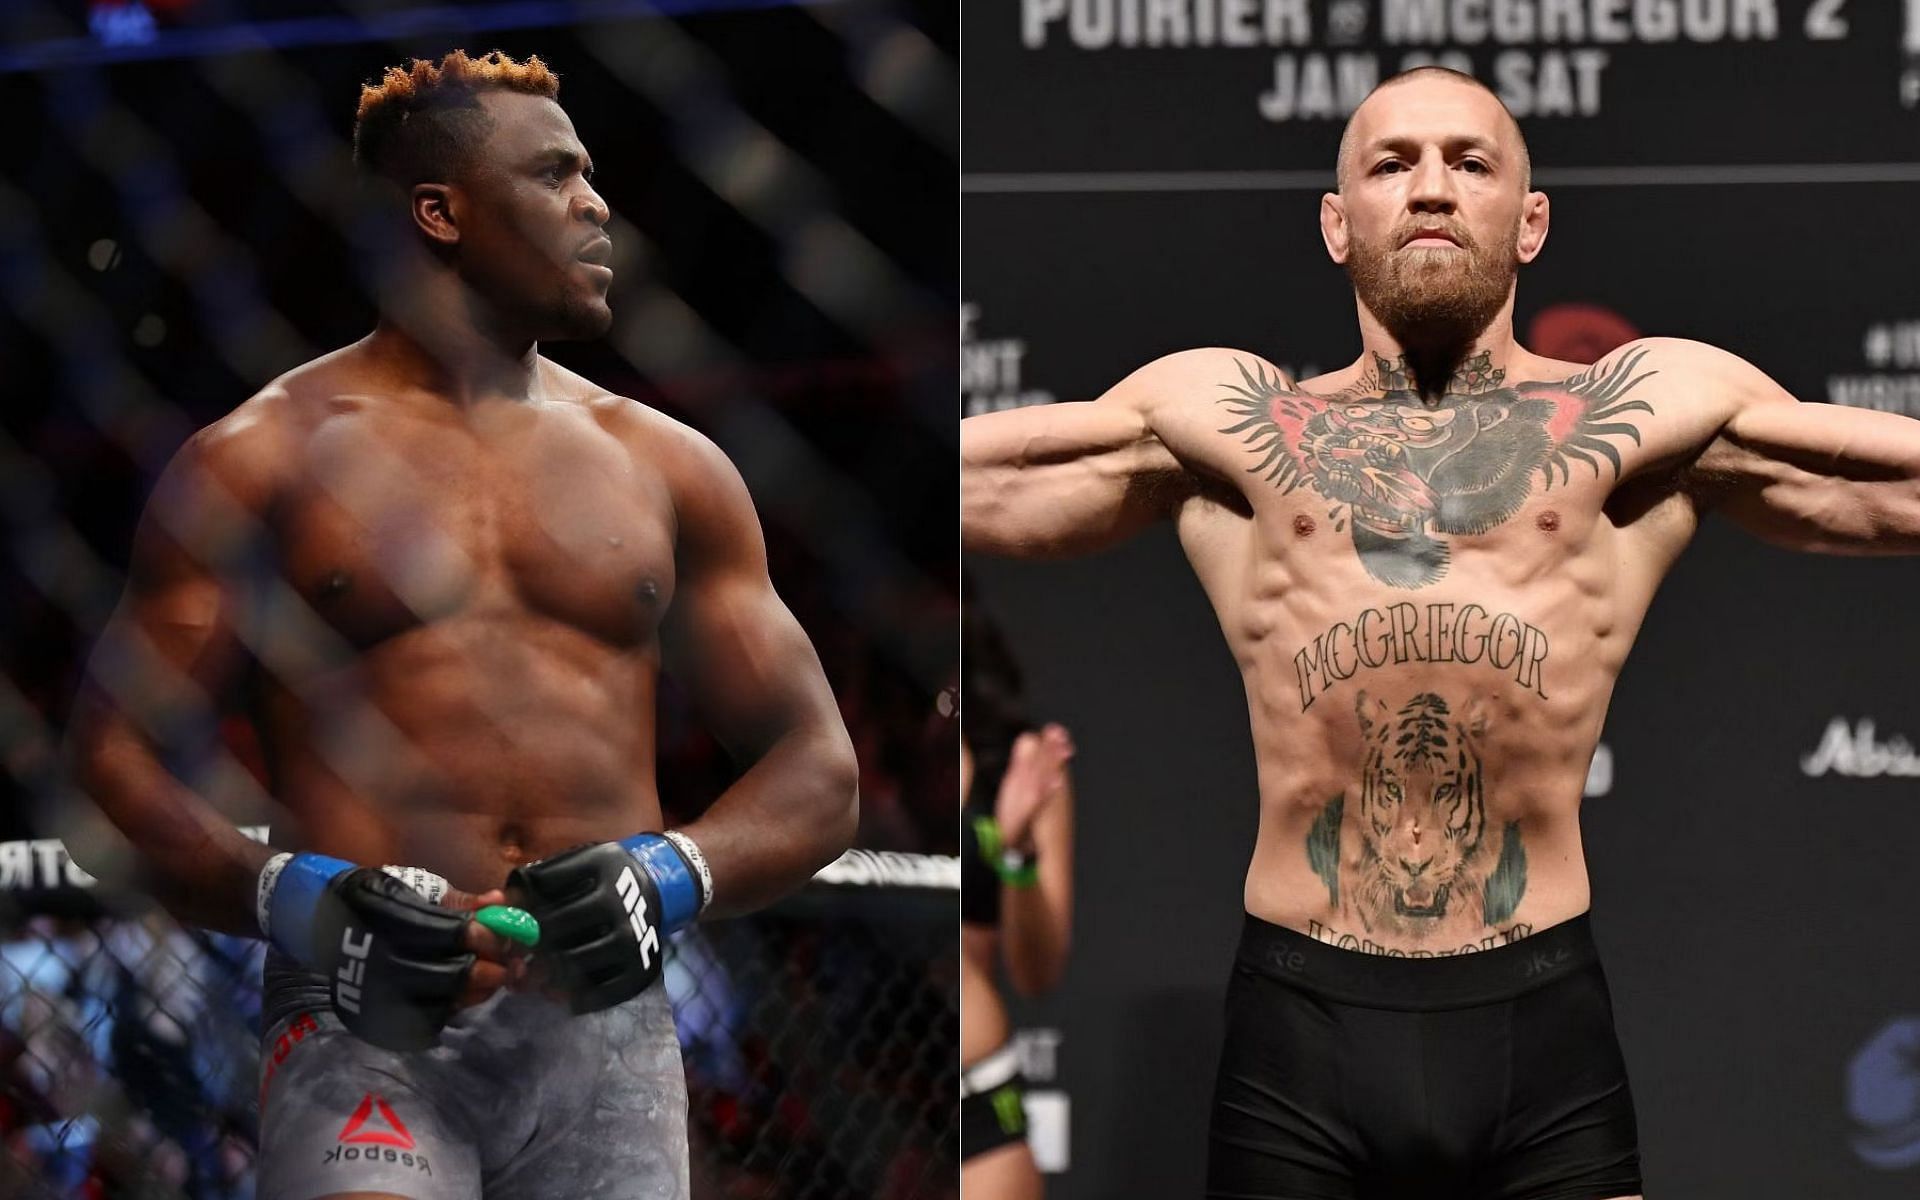 UFC Hall-of-Famer claims Francis Ngannou could possibly win boxing debut if  he performs "half as good as" Conor McGregor